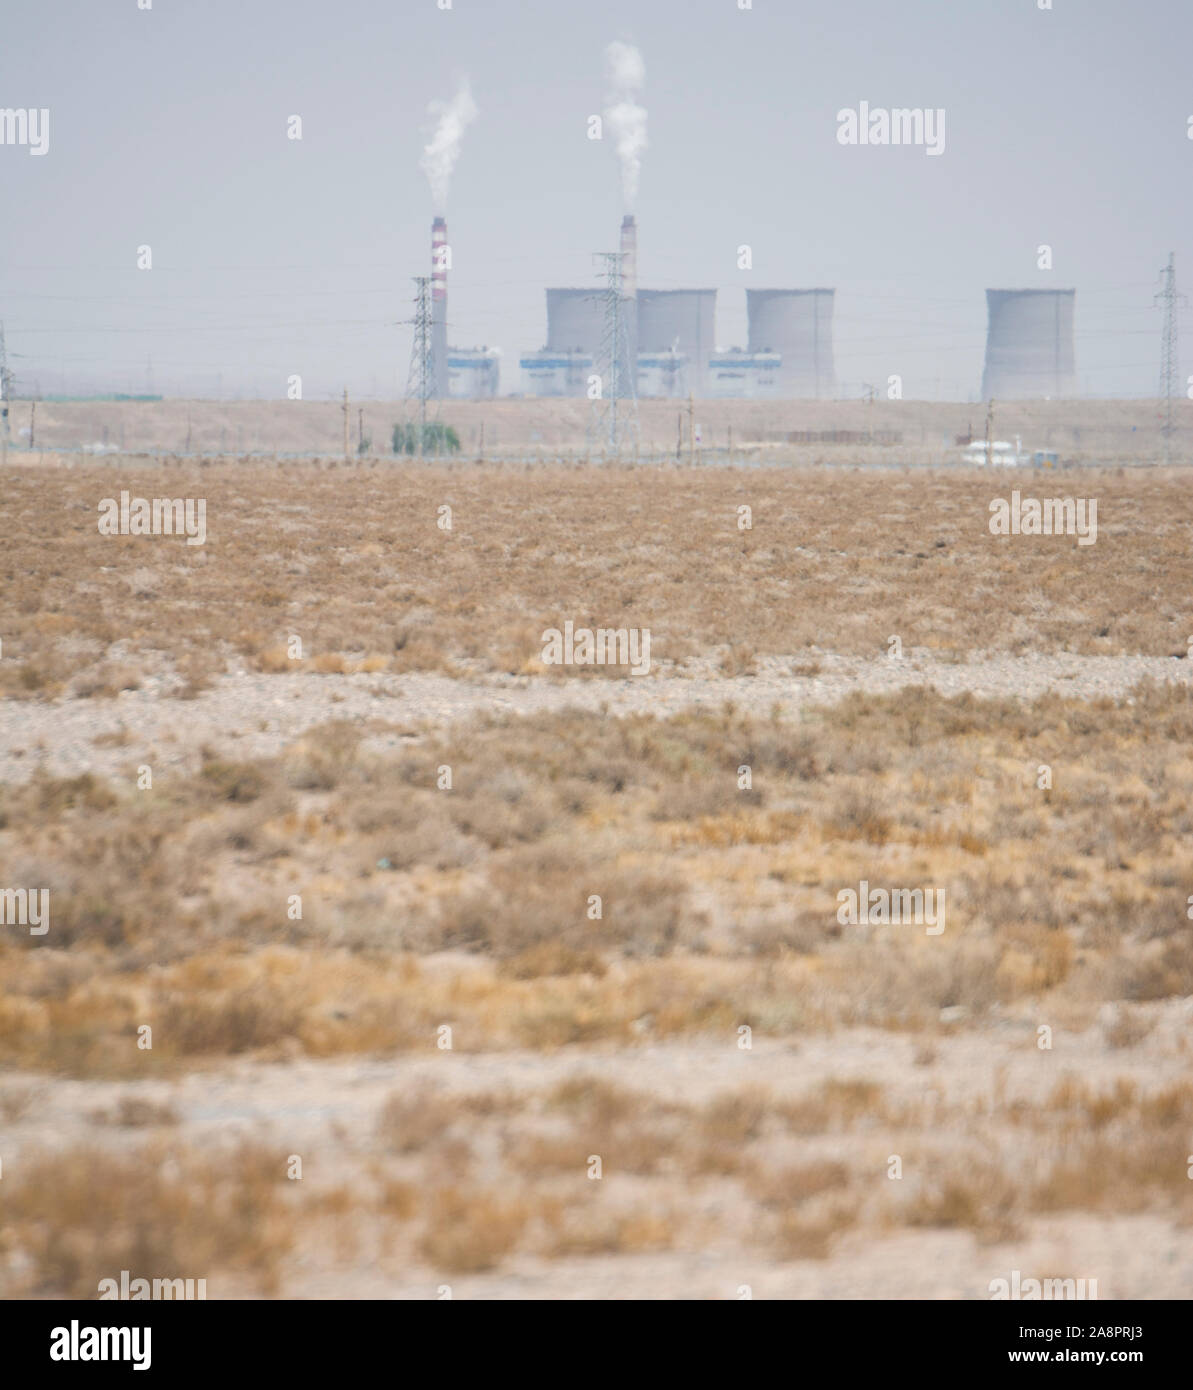 Huge industrial facility in the middle of the desert, Jiayuguan, China Stock Photo